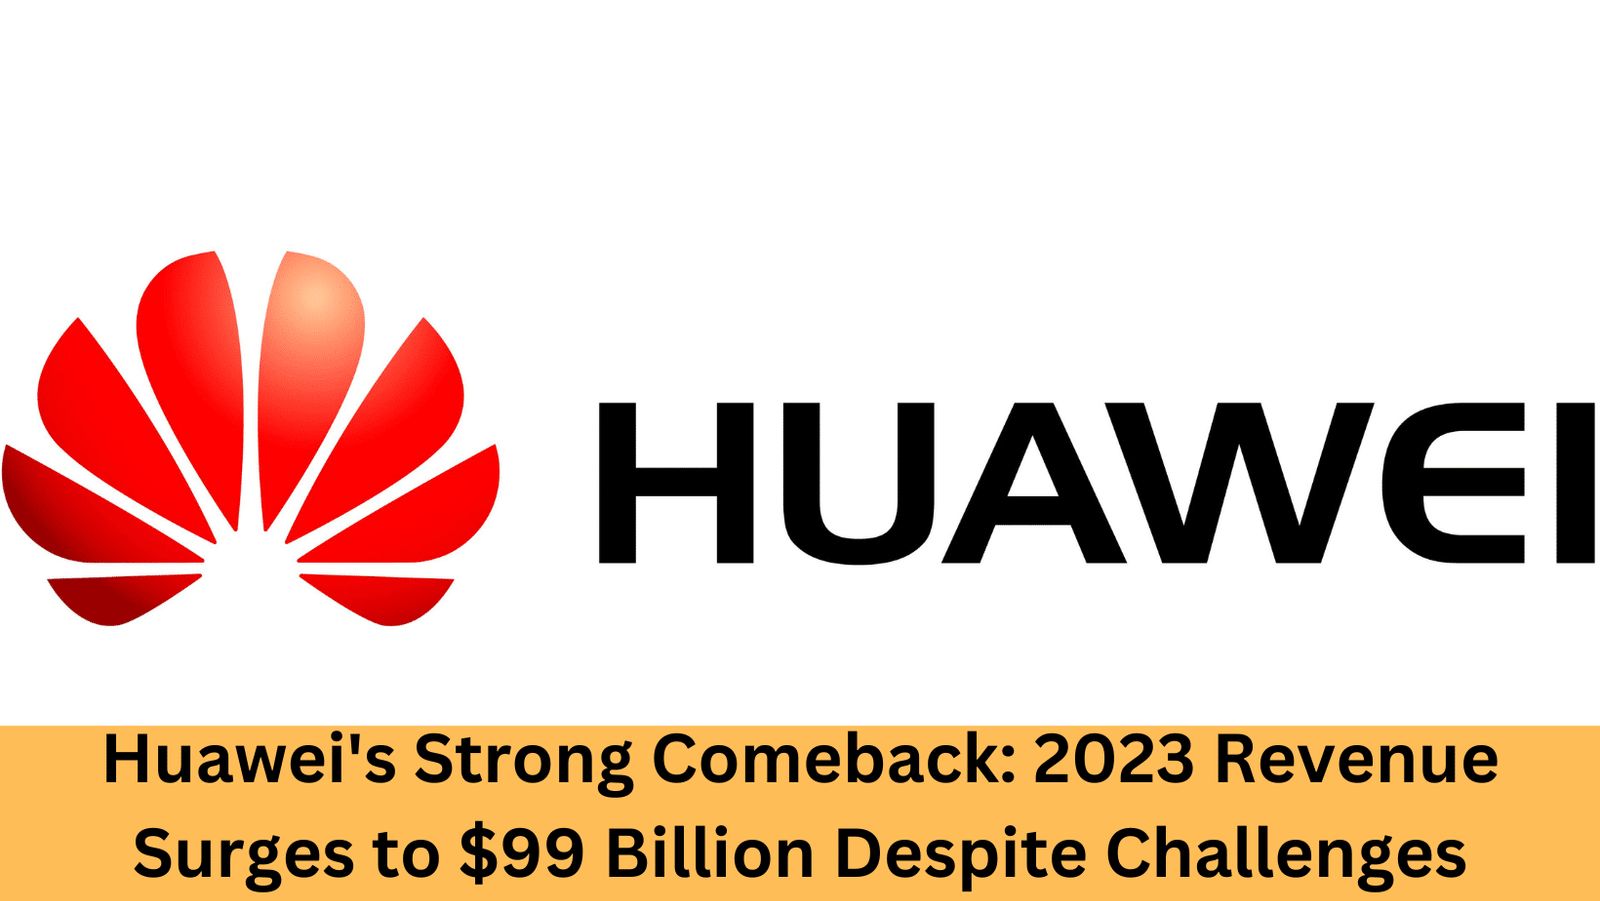 Huawei's Remarkable Rebound in 2023